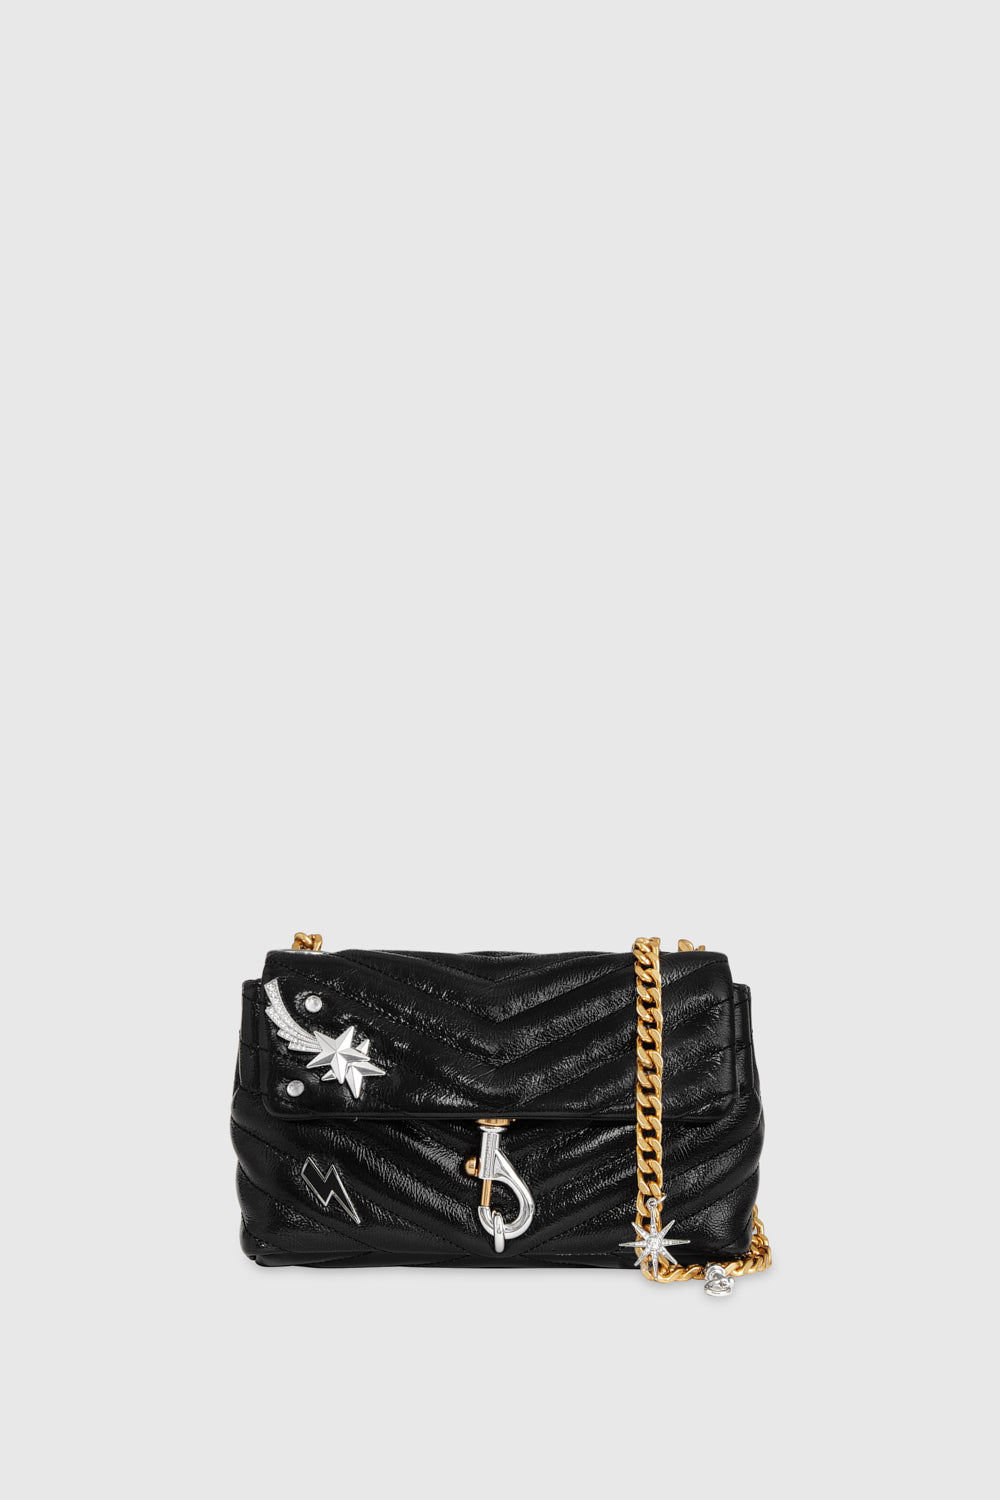 Rebecca Minkoff - Edie Date Night Crossbody With Celestial Charms